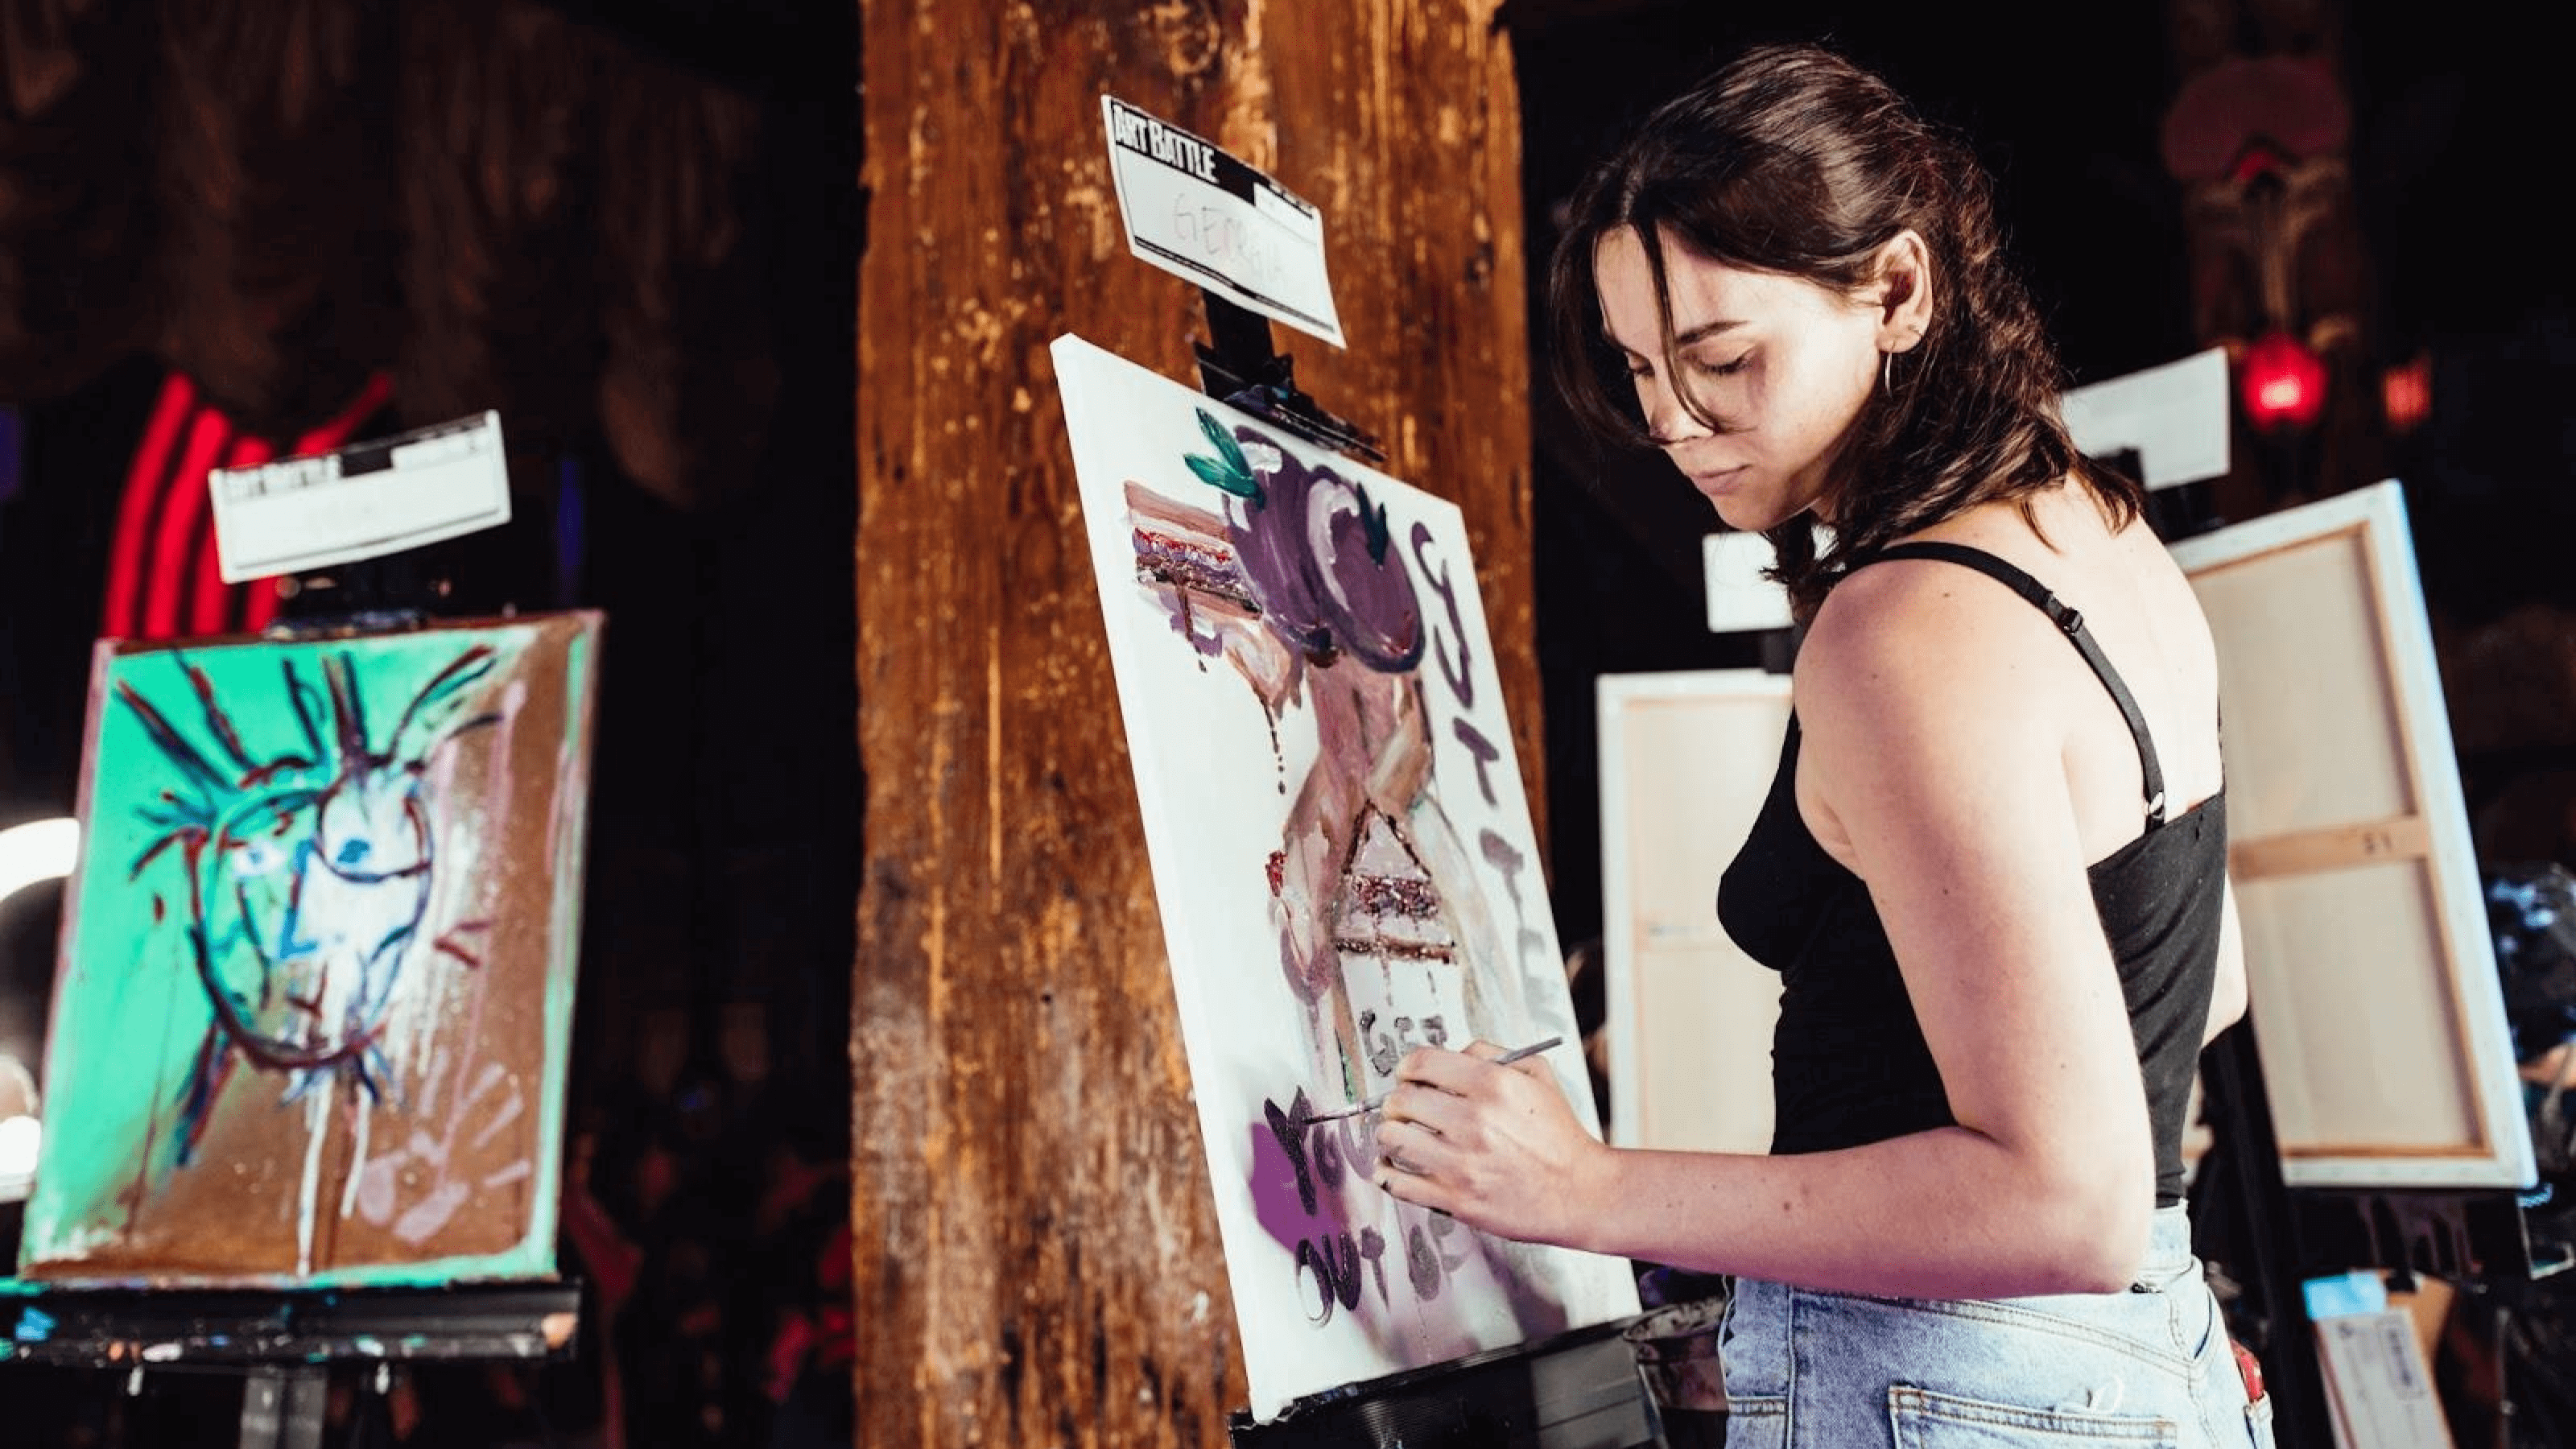 Artist painting at the art battle international experiential marketing event